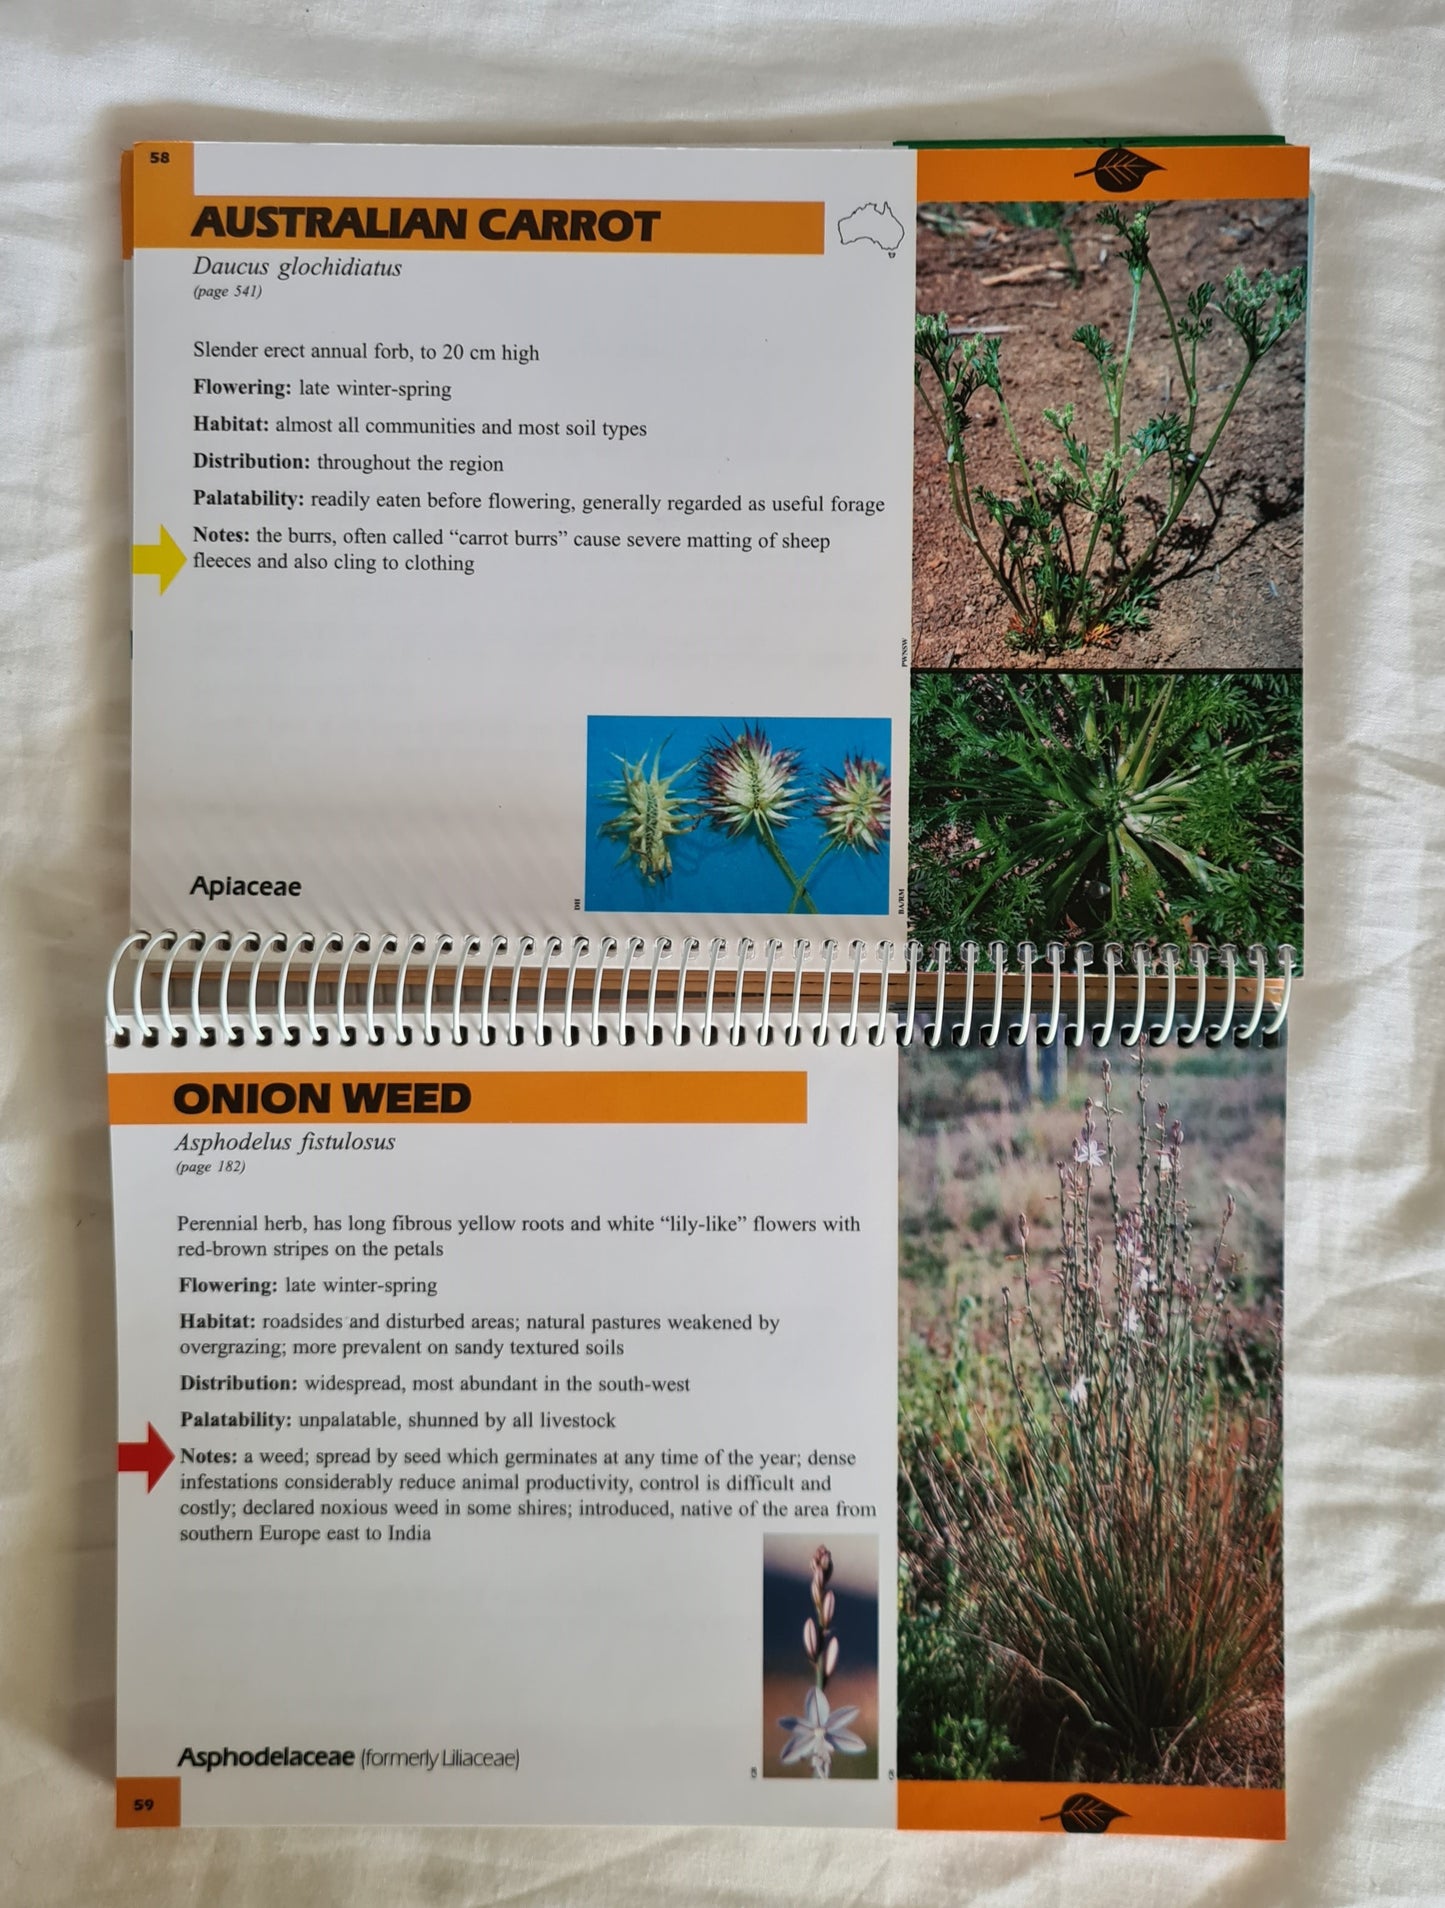 The Glove Box Guide to Plants of the NSW Rangelands by Greg Brooke and Lori McGarva